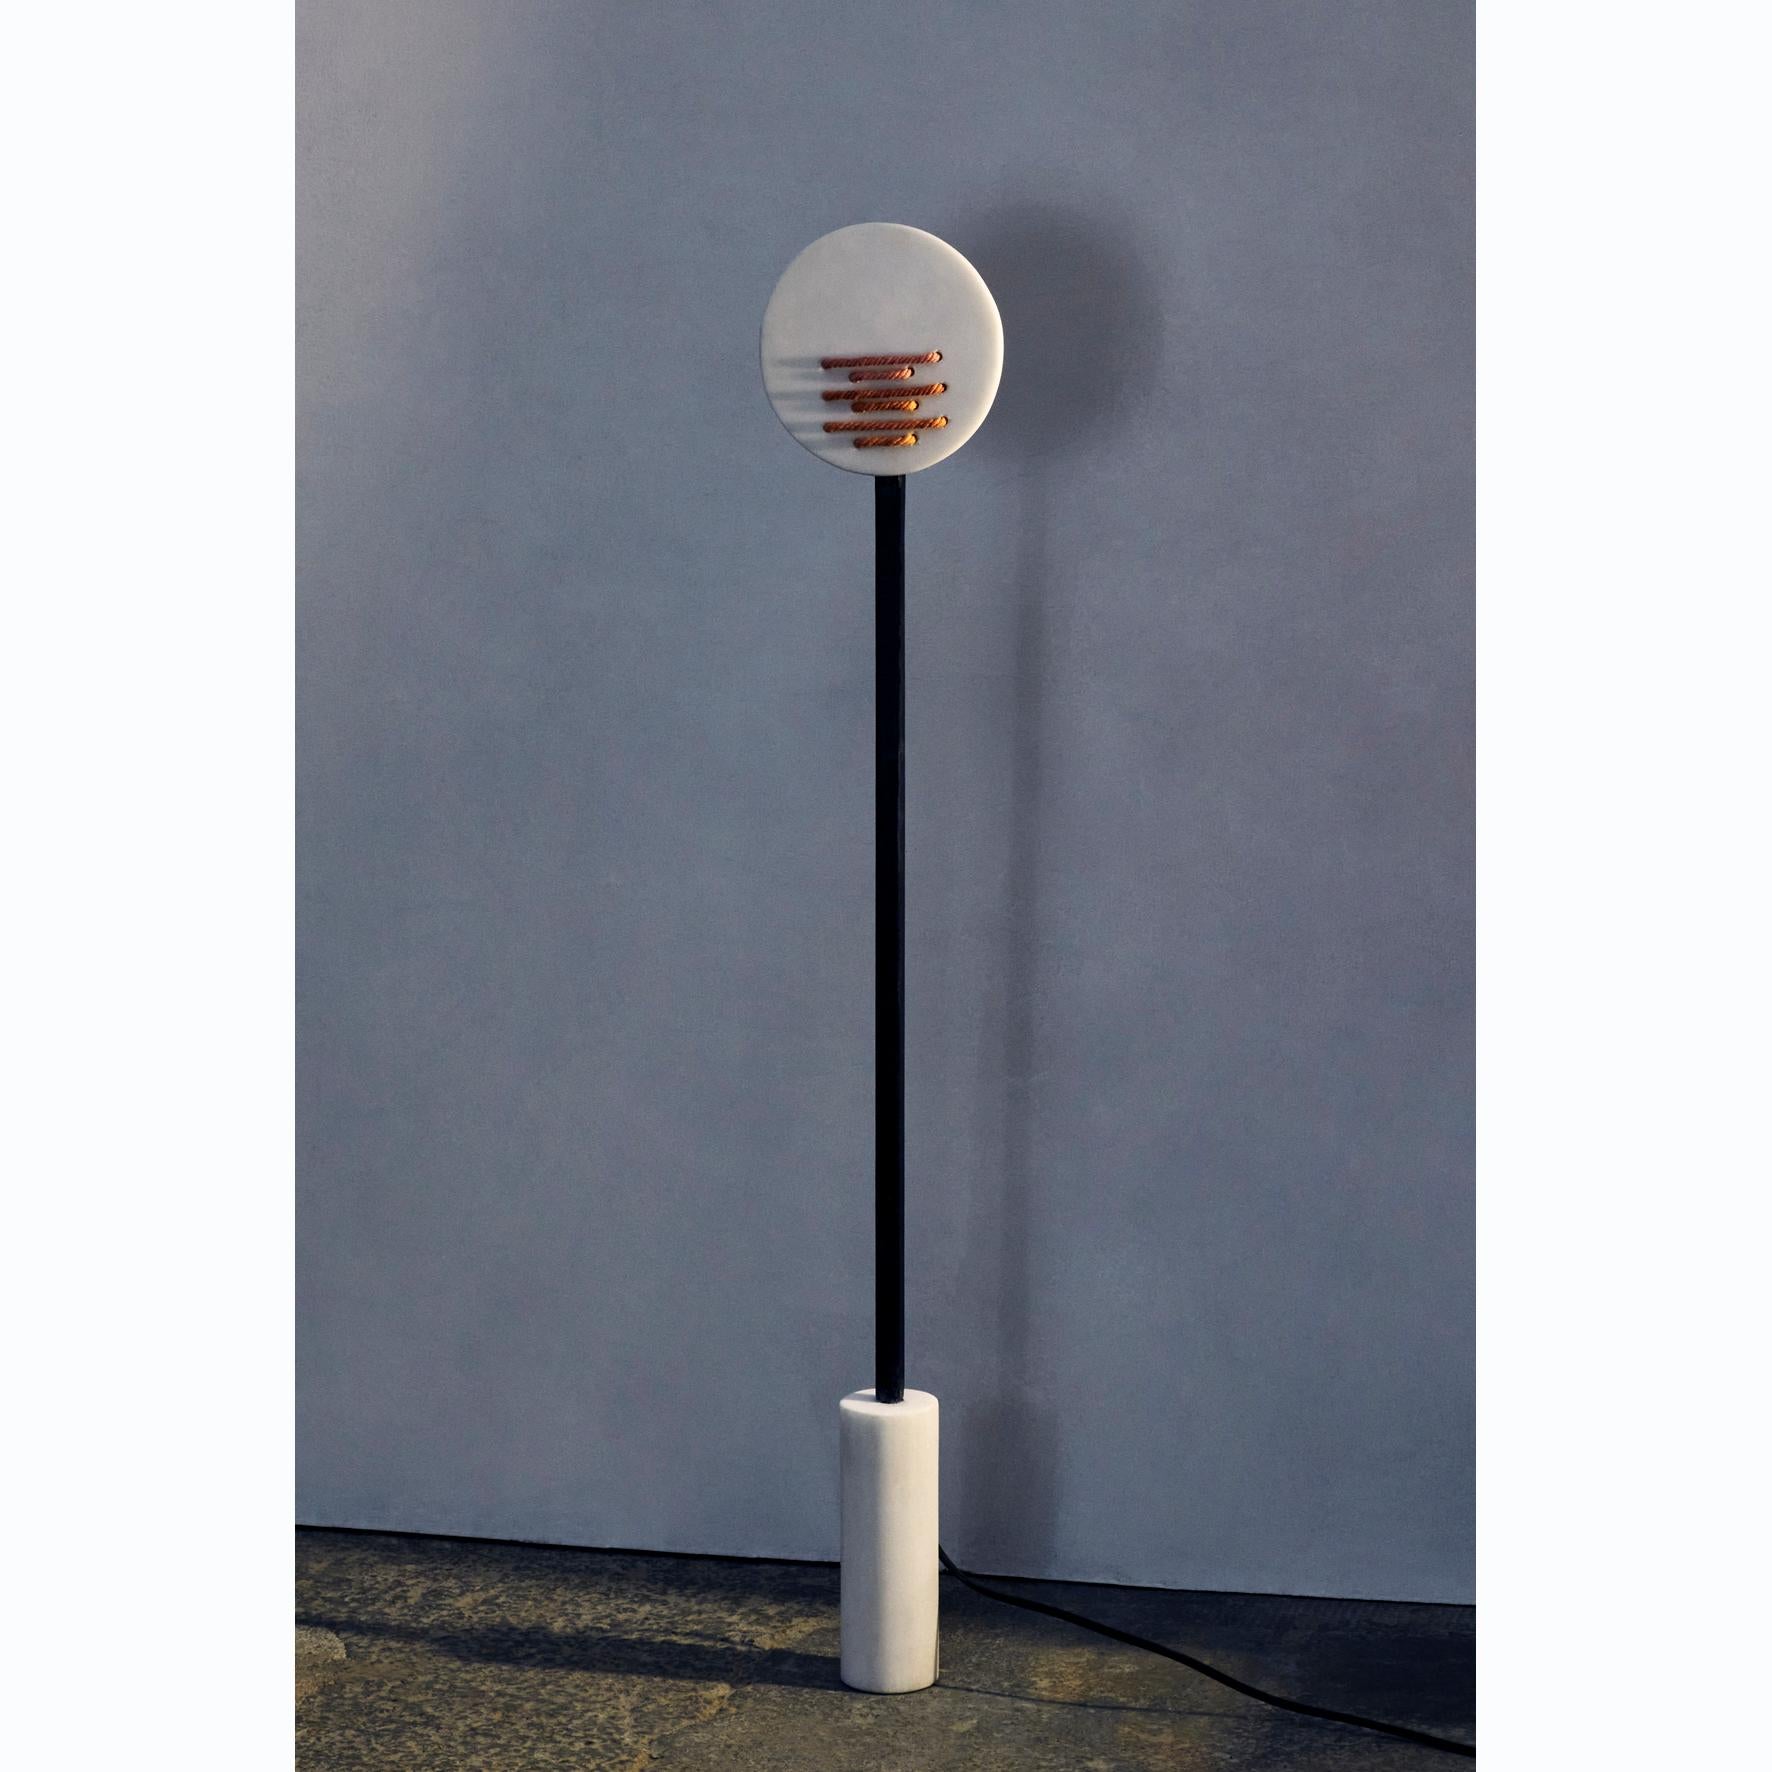 French Roshnee Lamp, a Marble and Dyed Wood Floor Lamp, Matang and Natasha Sumant For Sale